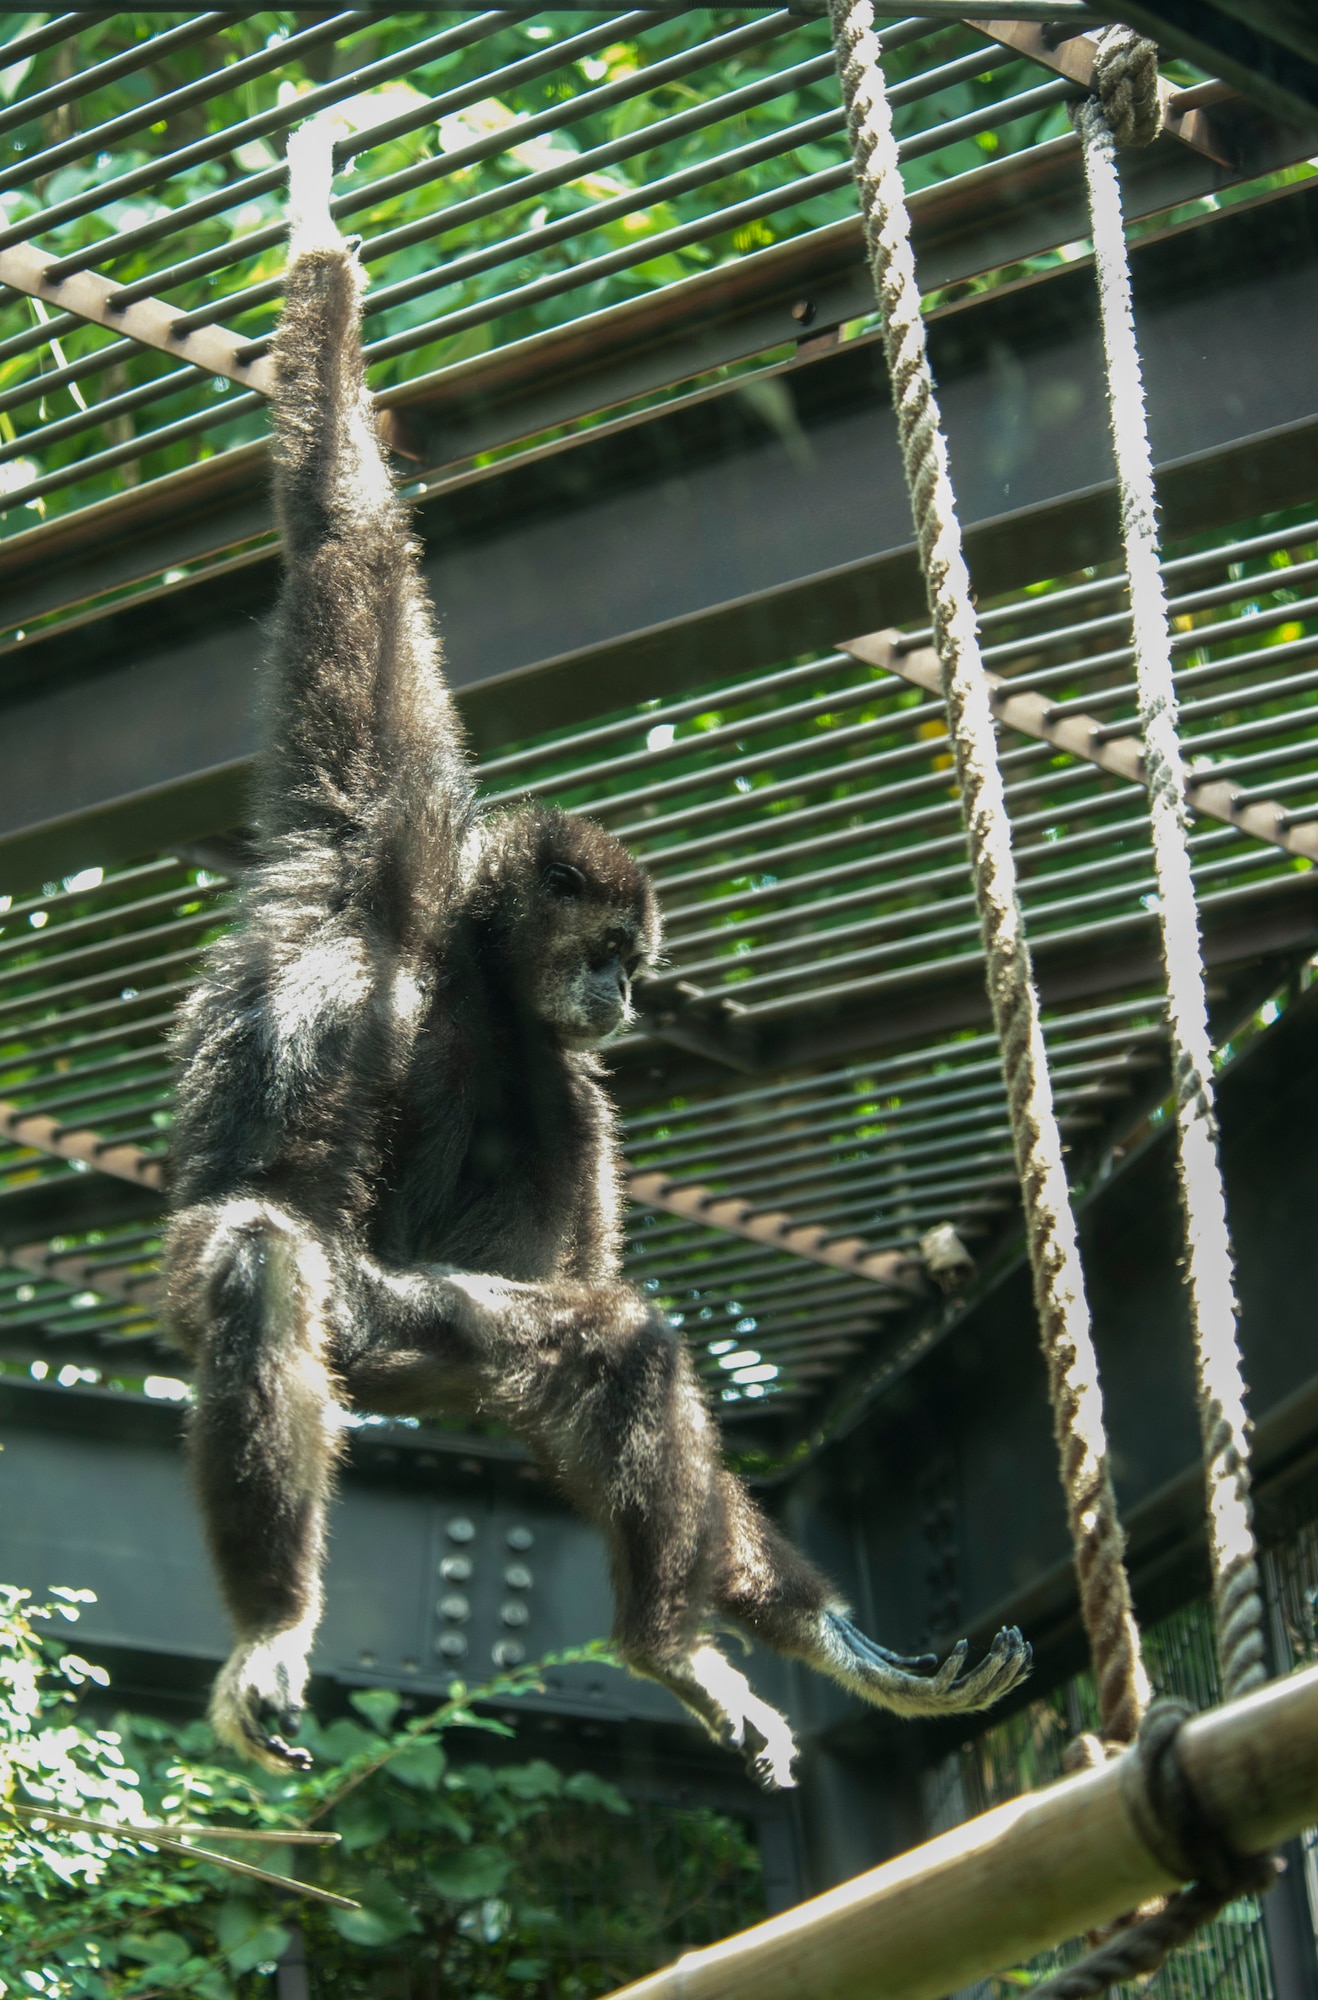 A gibbons hangs from the roof of his enclosure at Ueno Zoo Aug. 6, 2013. Ueno Zoo is the oldest zoo in Japan. It was founded in 1882 and is roughly 35 square acres in size. (U.S. Air Force photo by Senior Airman Michael Washburn)